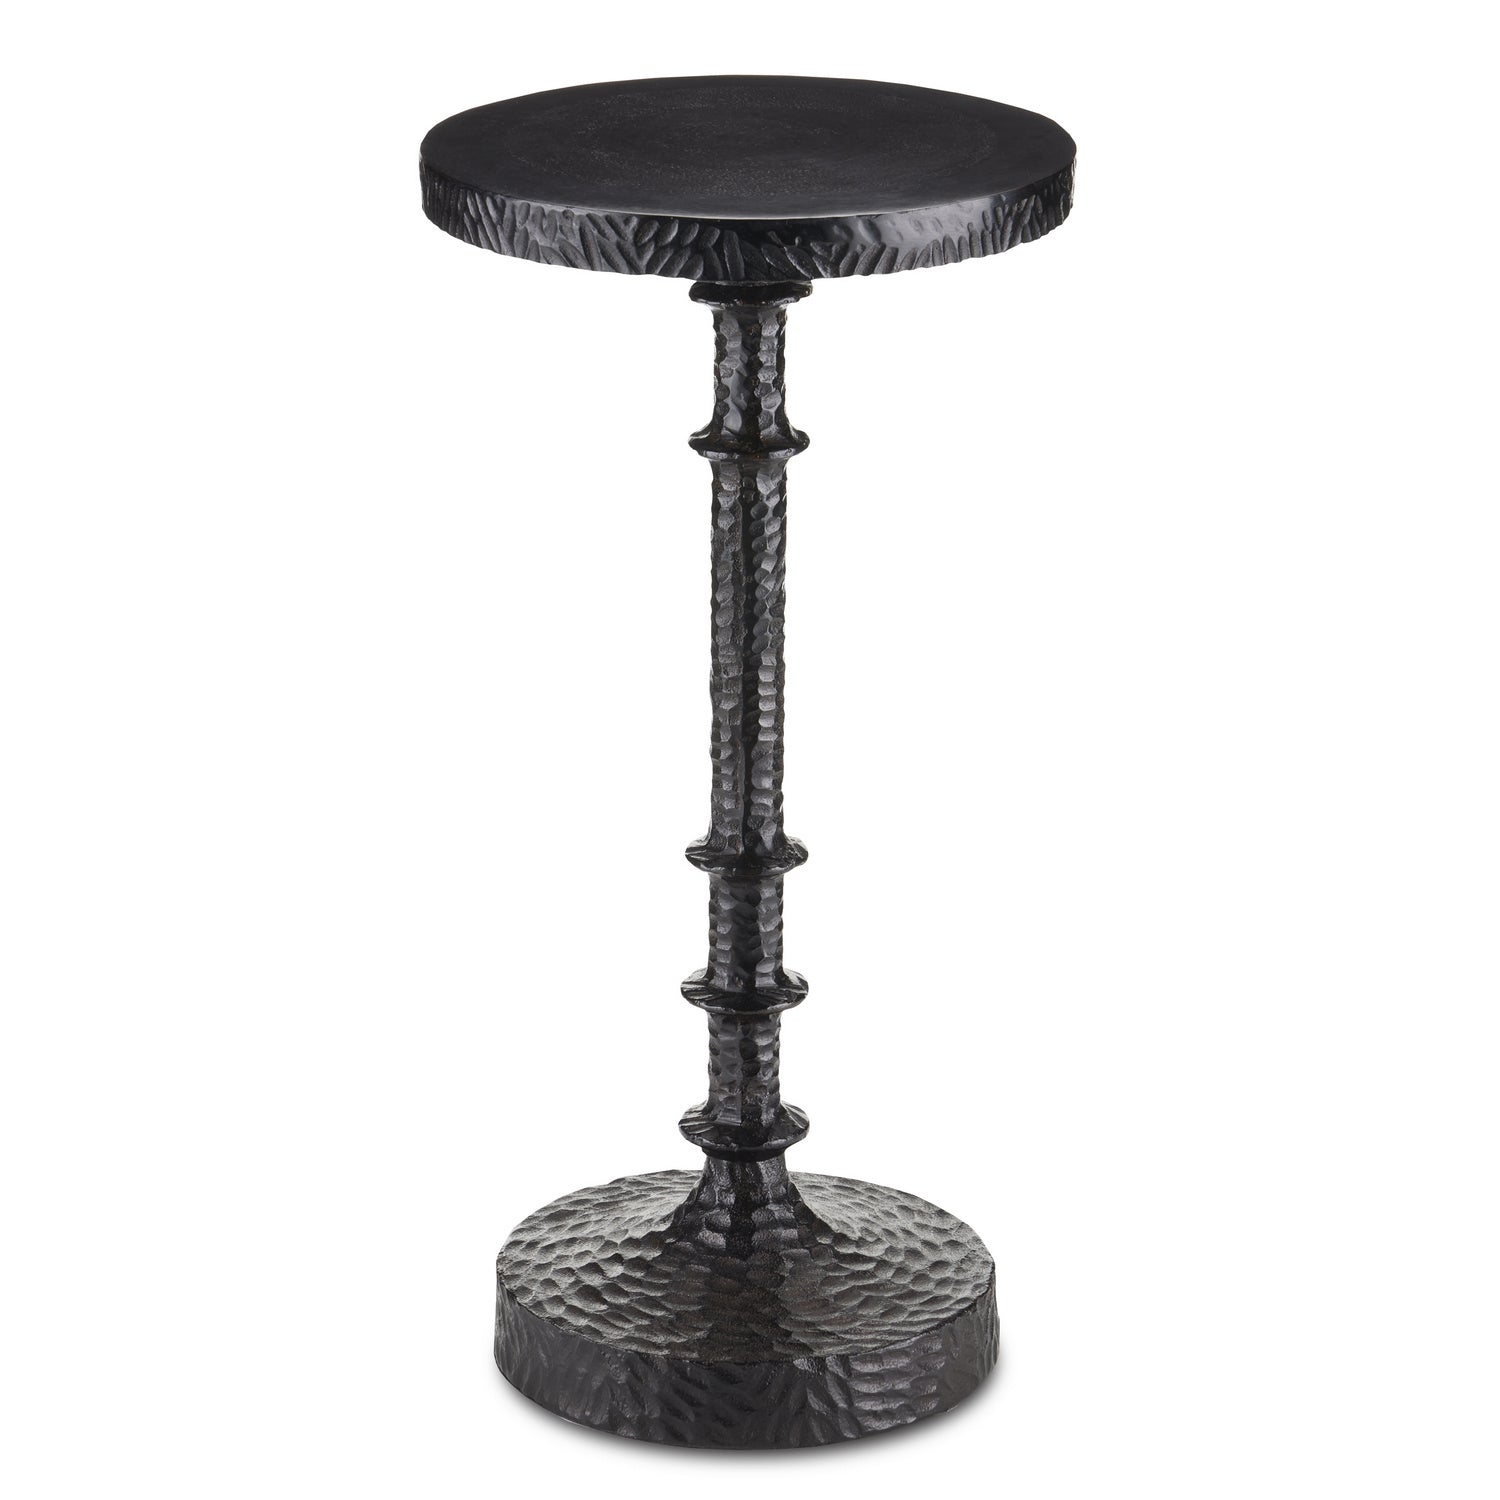 Currey and Company - 4000-0143 - Accent Table - Gallo - Bronze